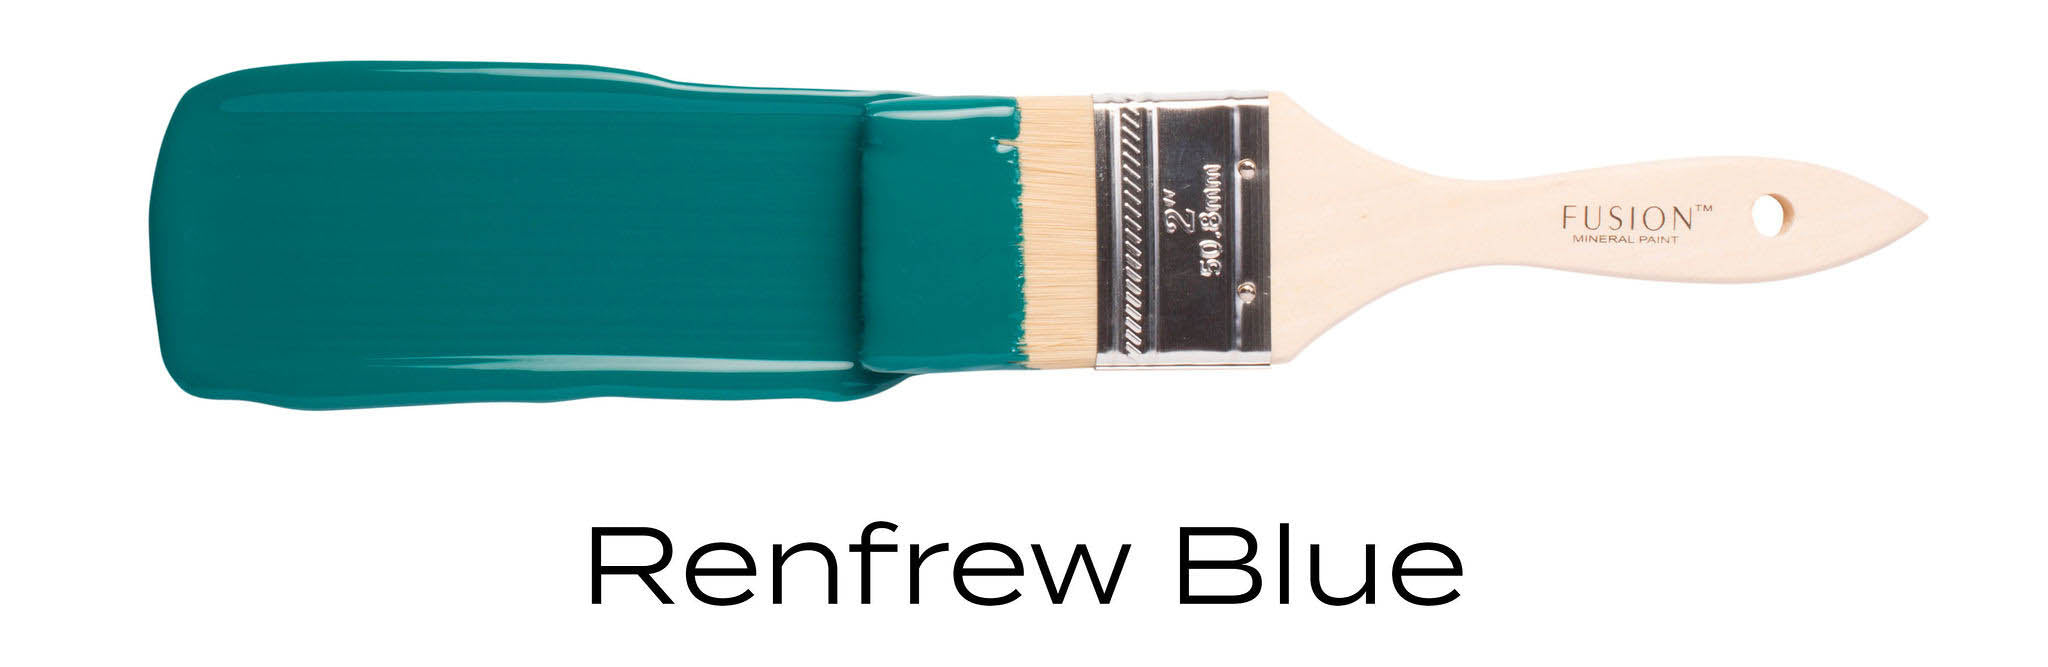 Renfrew Blue teal furniture paint by fusion mineral paint